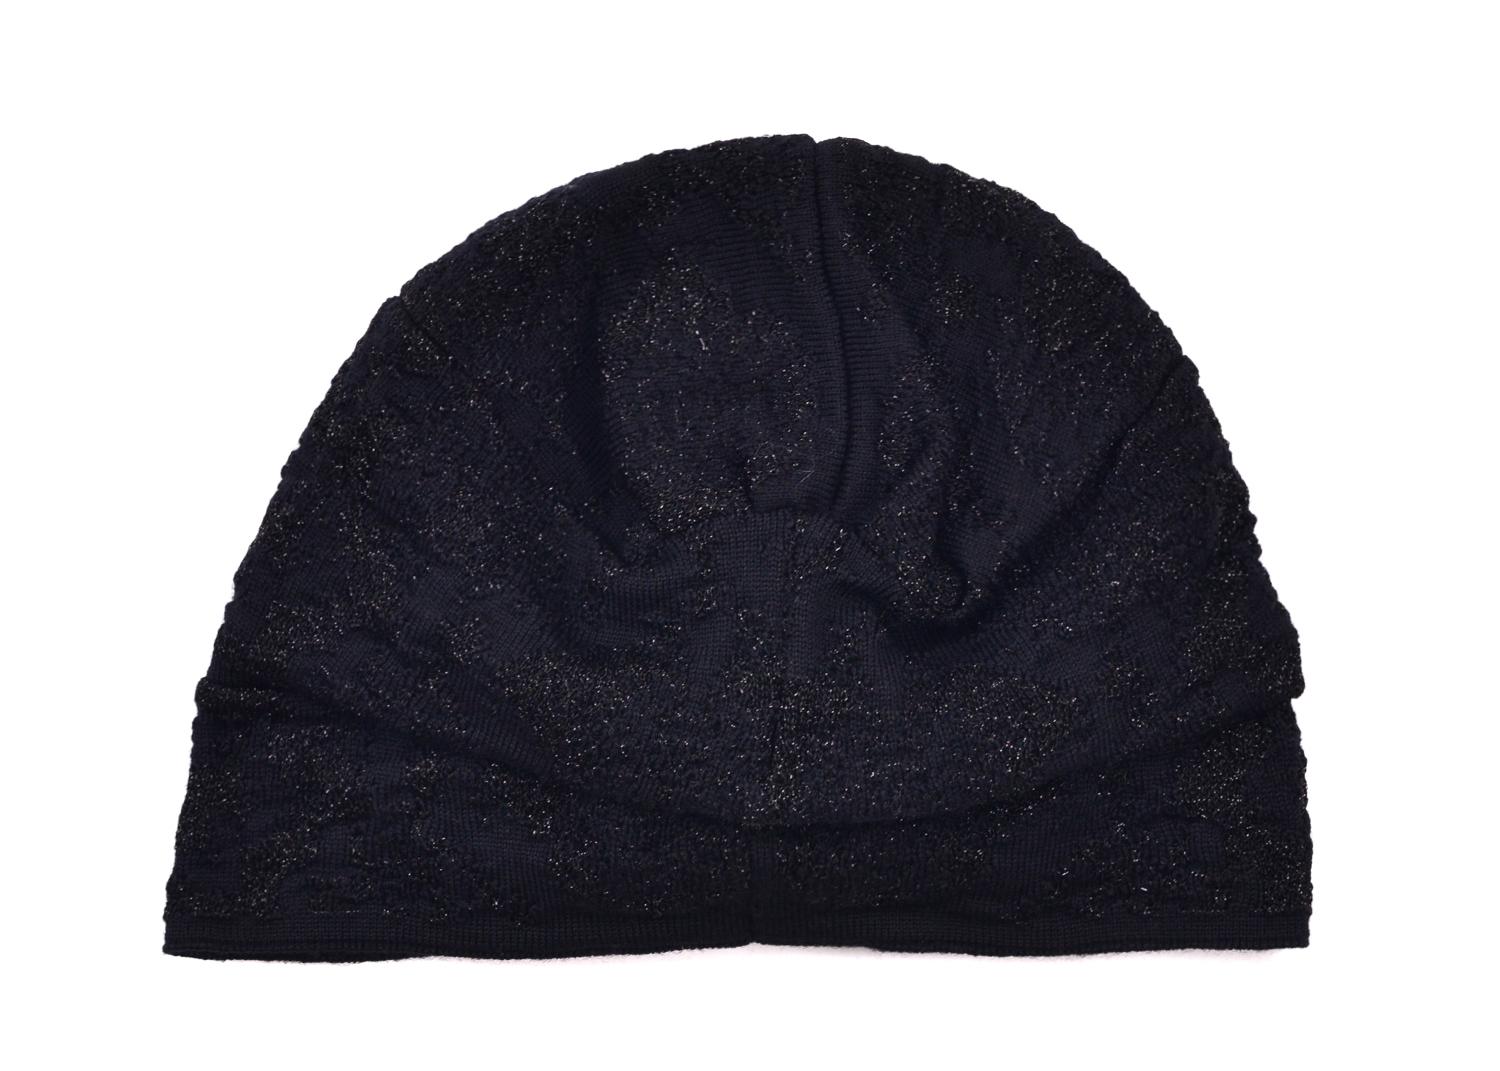 Roberto Cavalli Womens Black Lurex Ruched Knit Turban In New Condition For Sale In Brooklyn, NY